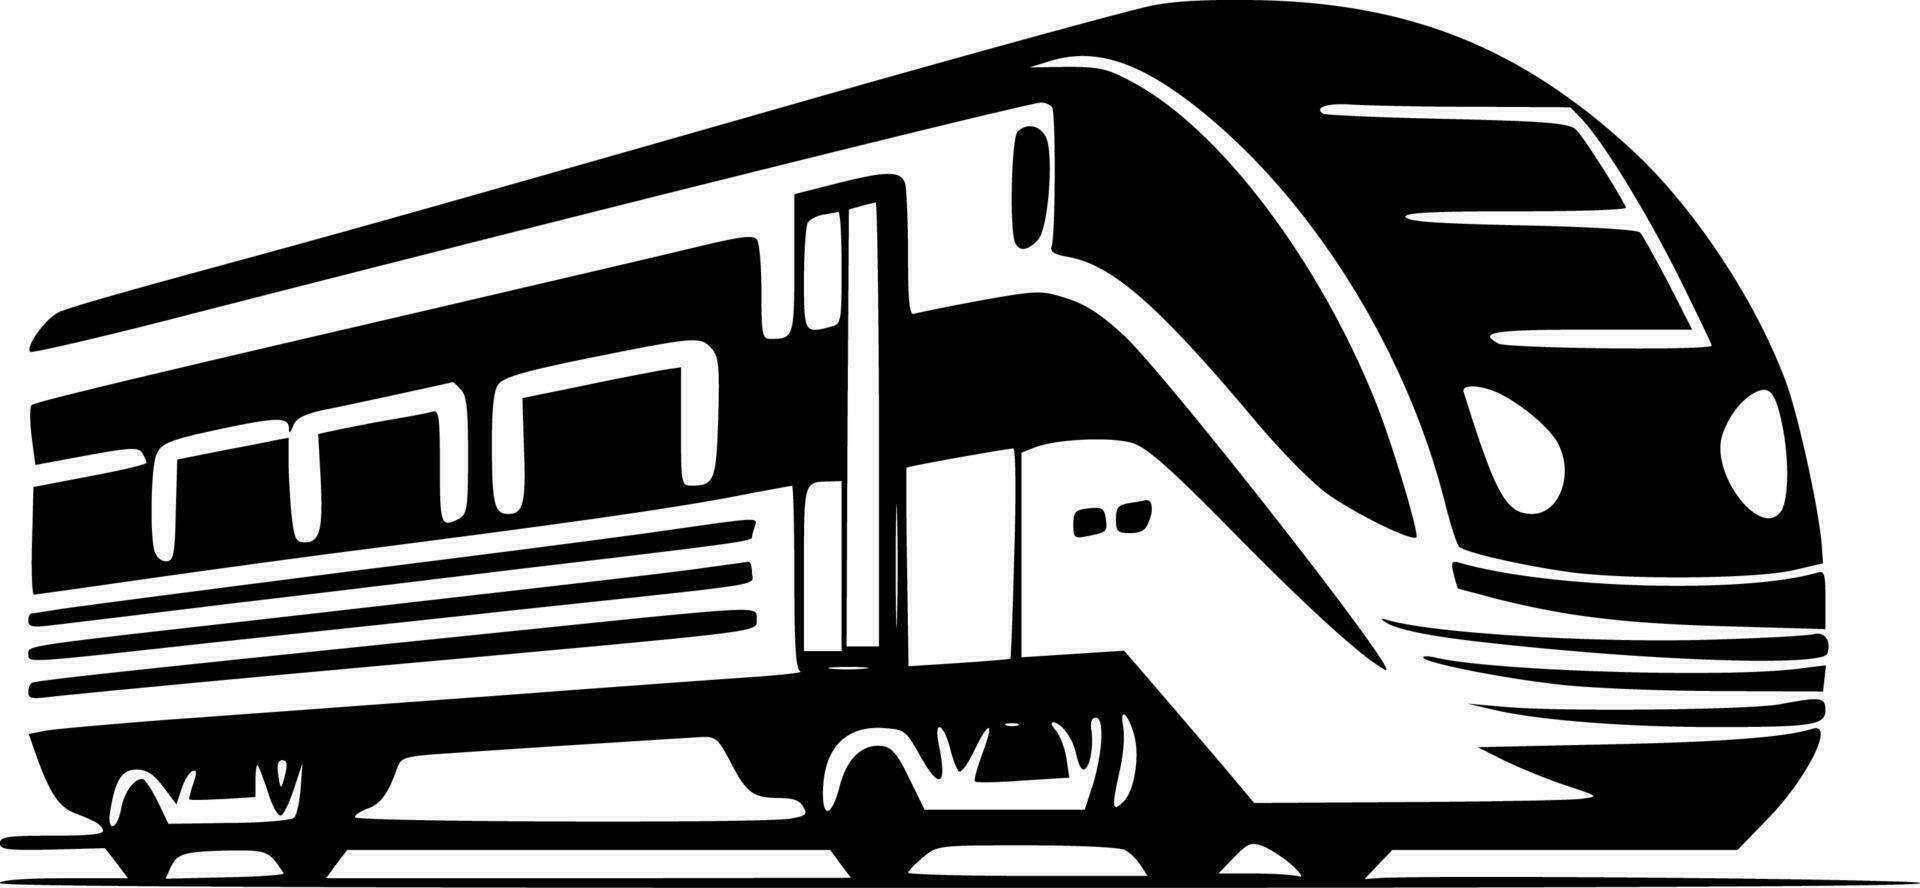 Train - Black and White Isolated Icon - Vector illustration